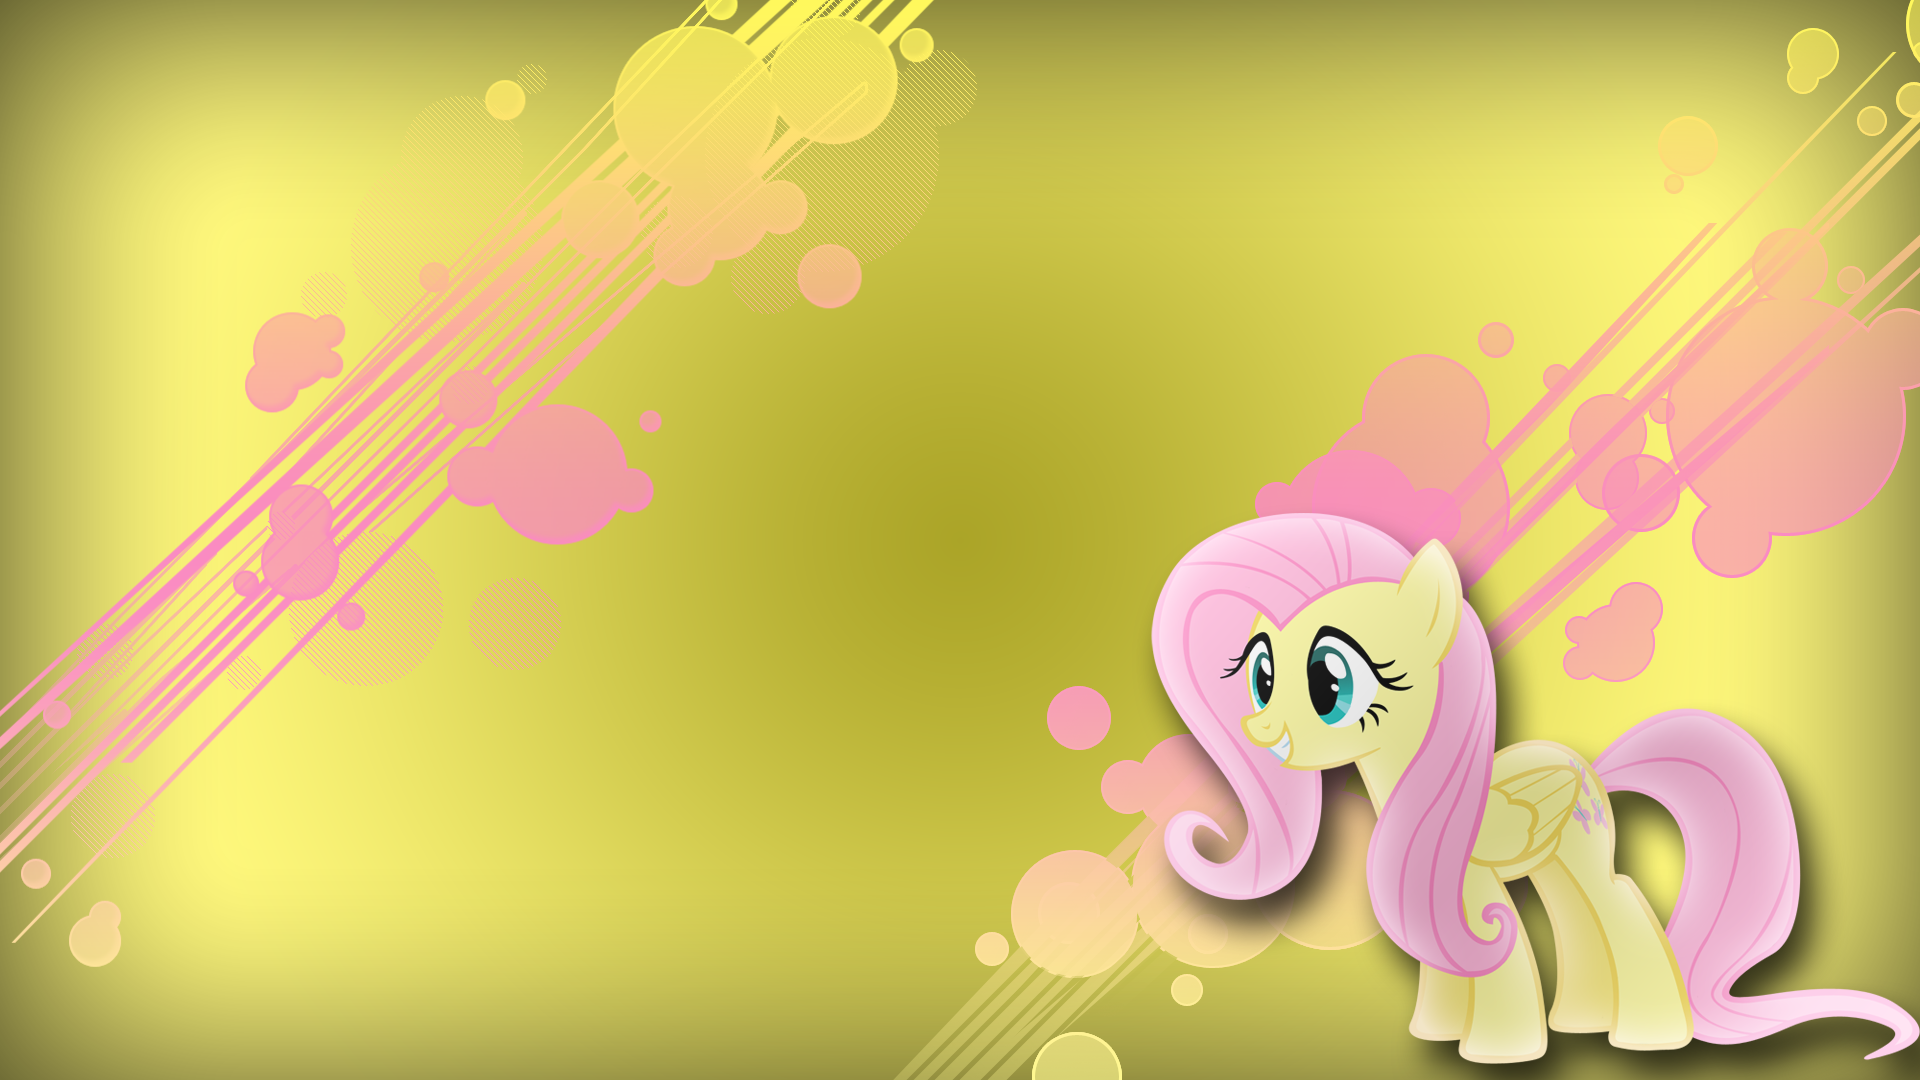 General 1920x1080 My Little Pony Fluttershy colorful